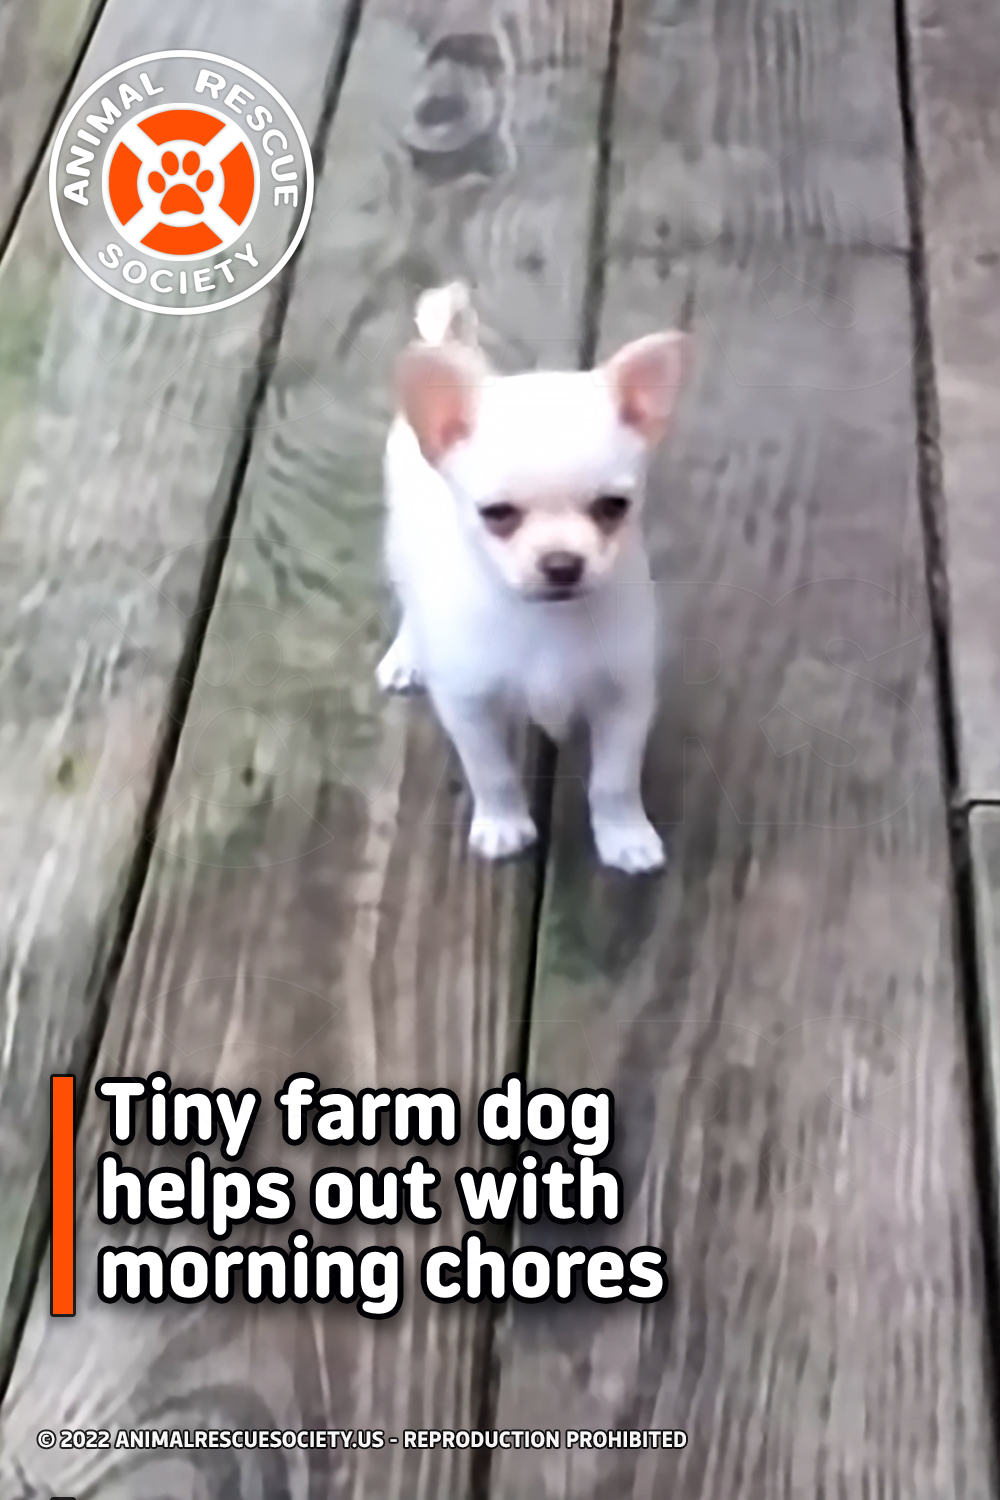 Tiny farm dog helps out with morning chores